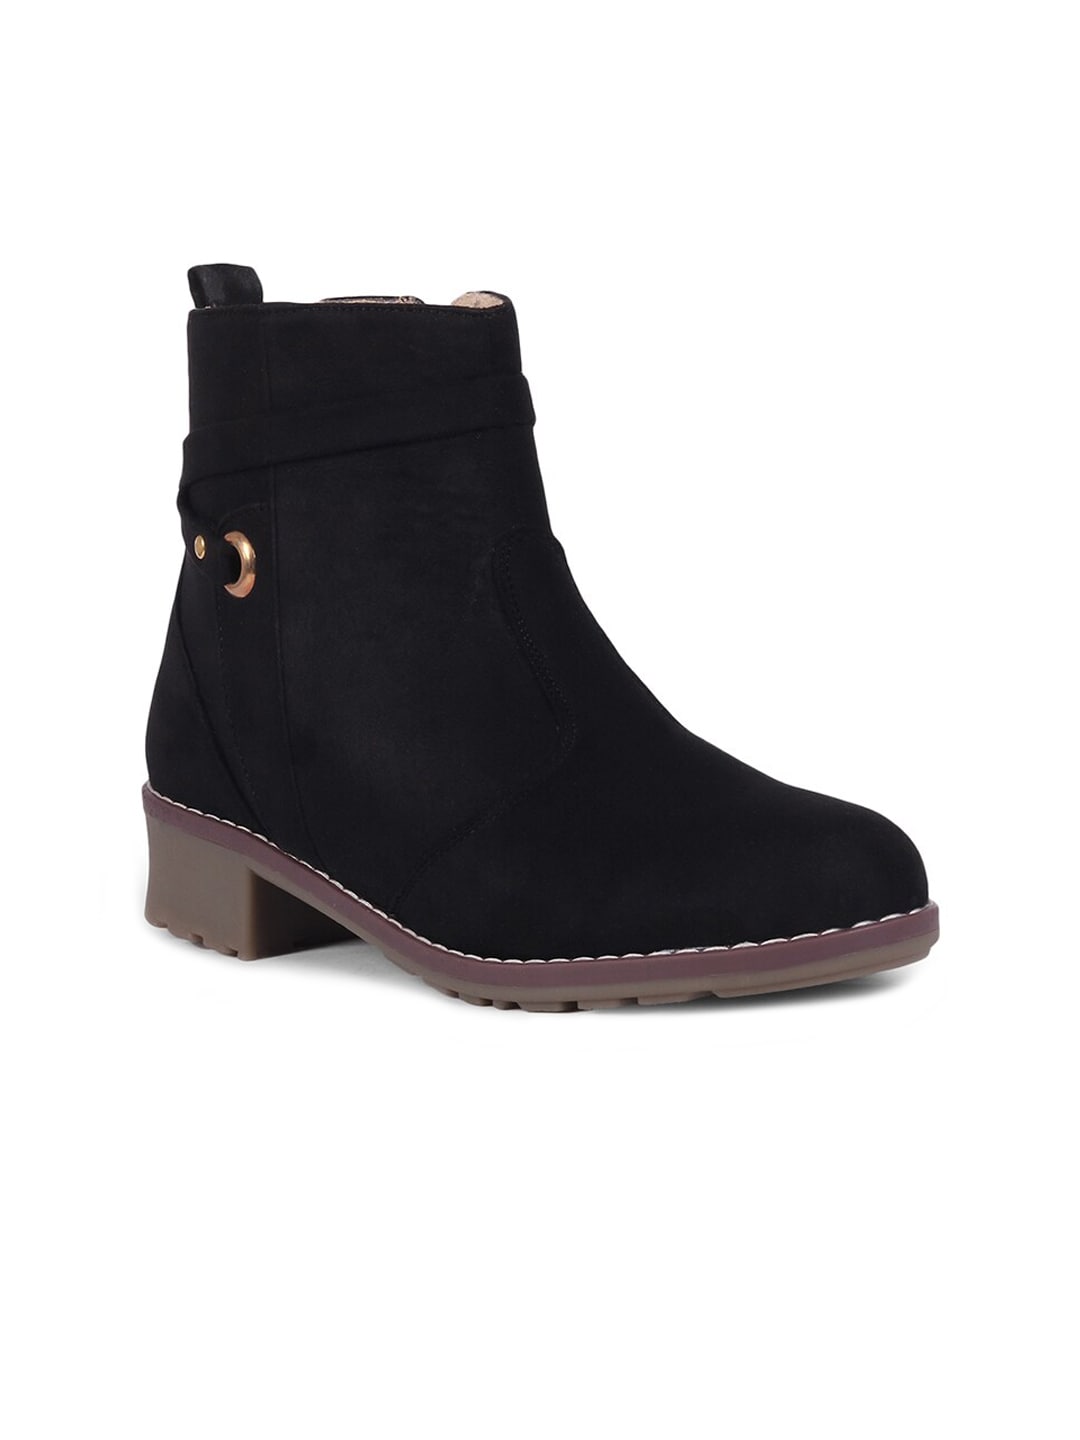 Bella Toes Women Black Suede Flat Boots Price in India